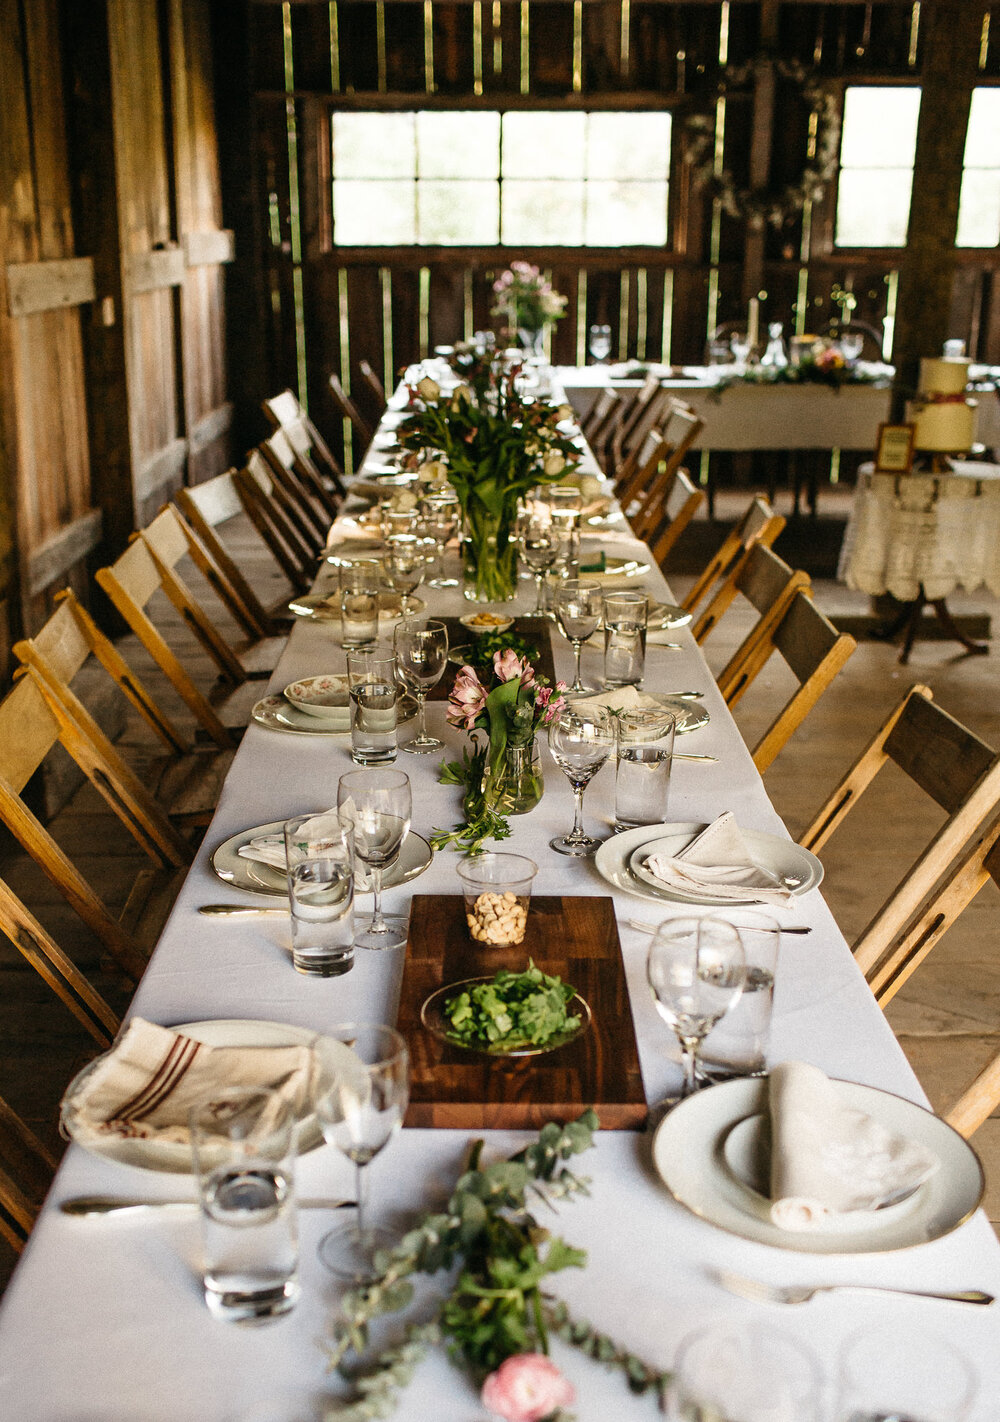 13 Reception Table Ideas For Your, How To Set Table For Wedding Reception